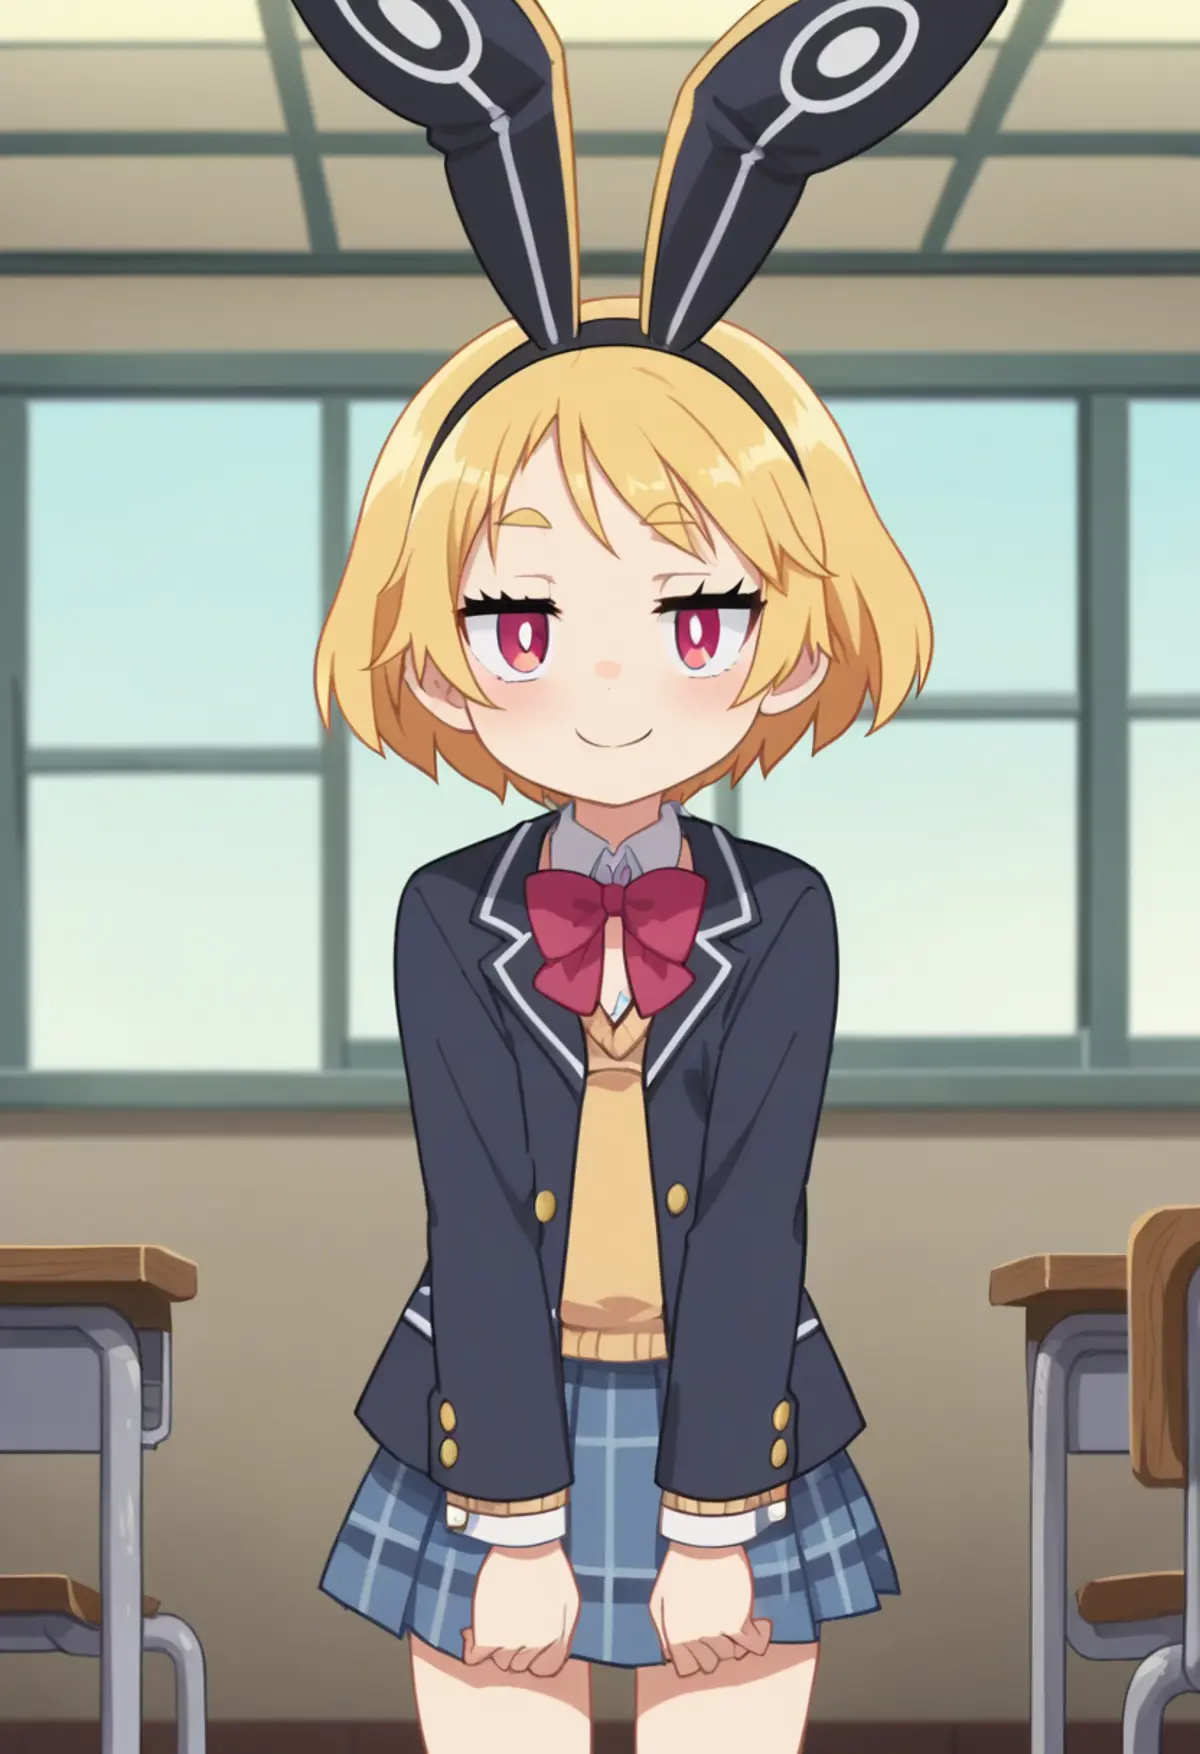 A girl with red eyes and blonde hair wearing a bunny ear headband standing in a classroom setting. She is dressed in a school uniform consisting of a blazer and a plaid skirt, and has a cheerful expression on their face. 